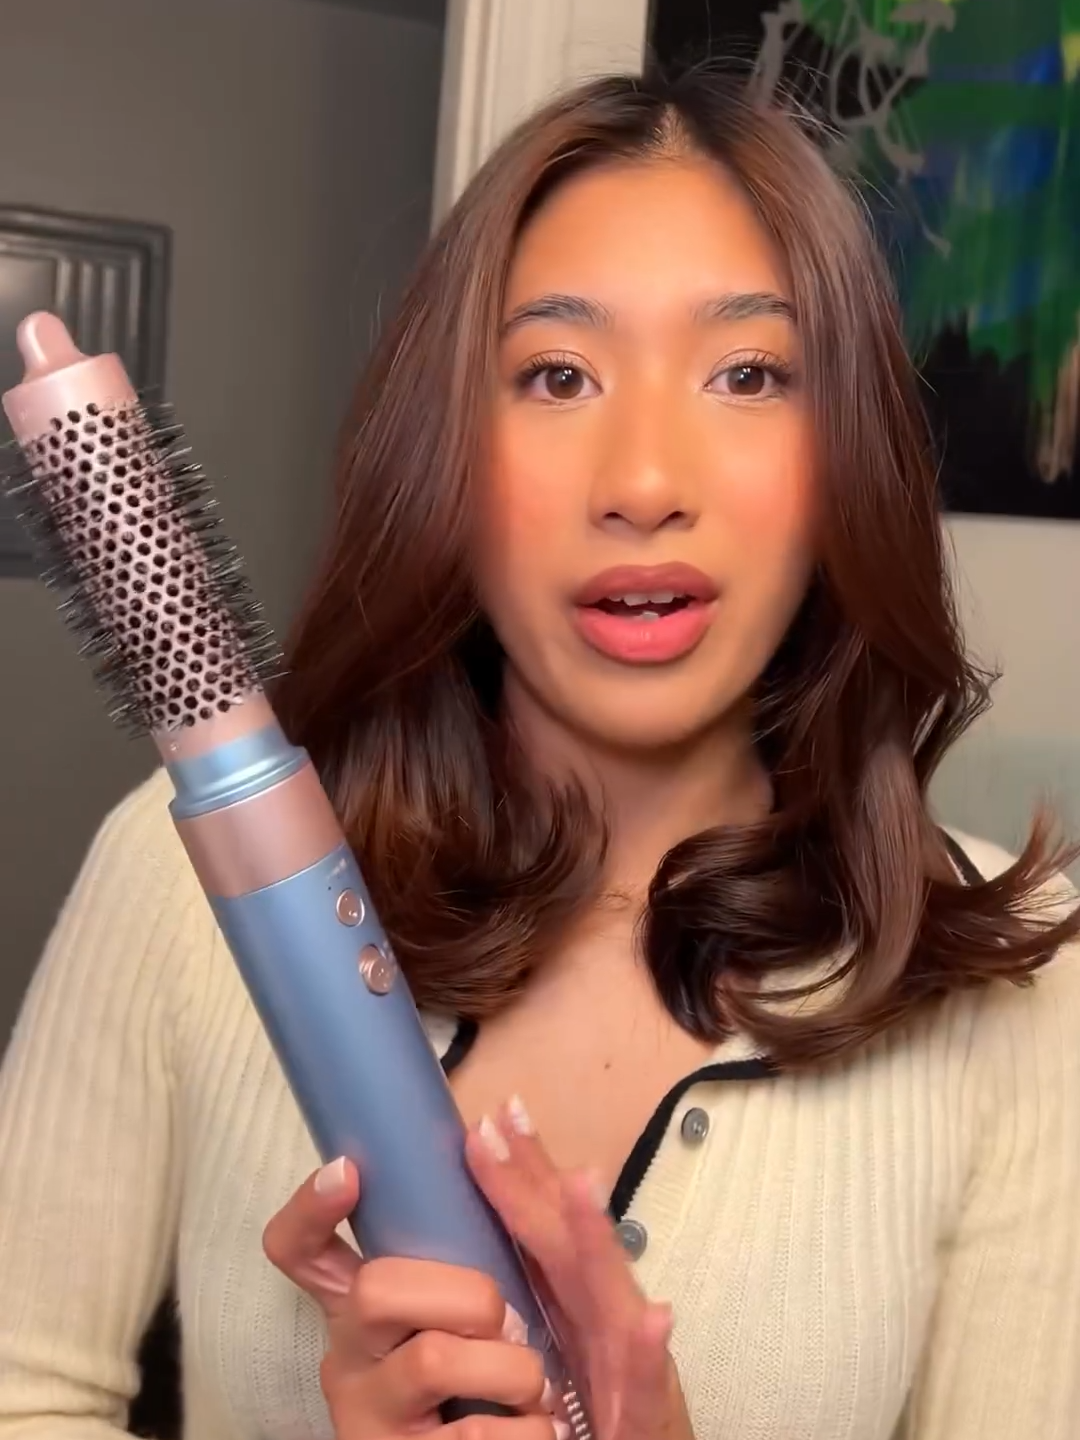 Yes, you can look this good for less with the DigitalAIRE Styling Wand Prime Day Deal, now thru July 17. Only @amazon  Shop Here - https://www.amazon.com/INFINITIPRO-DigitalAIRE-Blowouts-Attachments-Personalize/dp/B0D1ZJPXXN/ #hairtools #stylingwand #conair #primeday #primedaydeals #hairtutorial #blowoututorial #blowout #hairdryer #repost @heyshaynamae